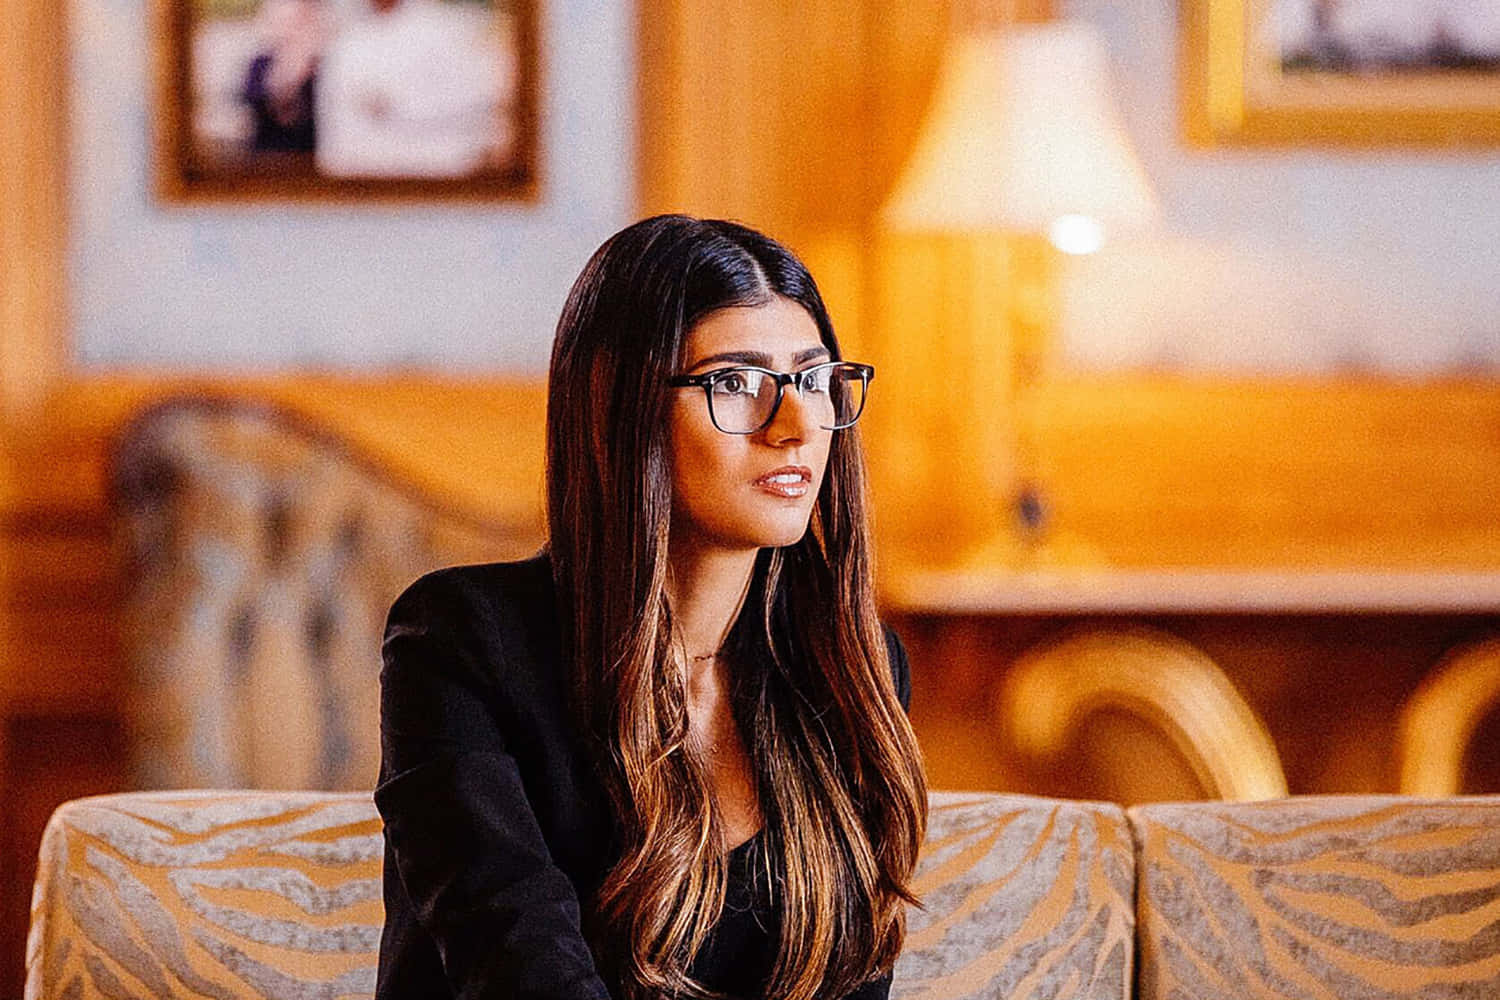 Mia Khalifa is an iconic entertainer and influencer in the adult entertainment industry